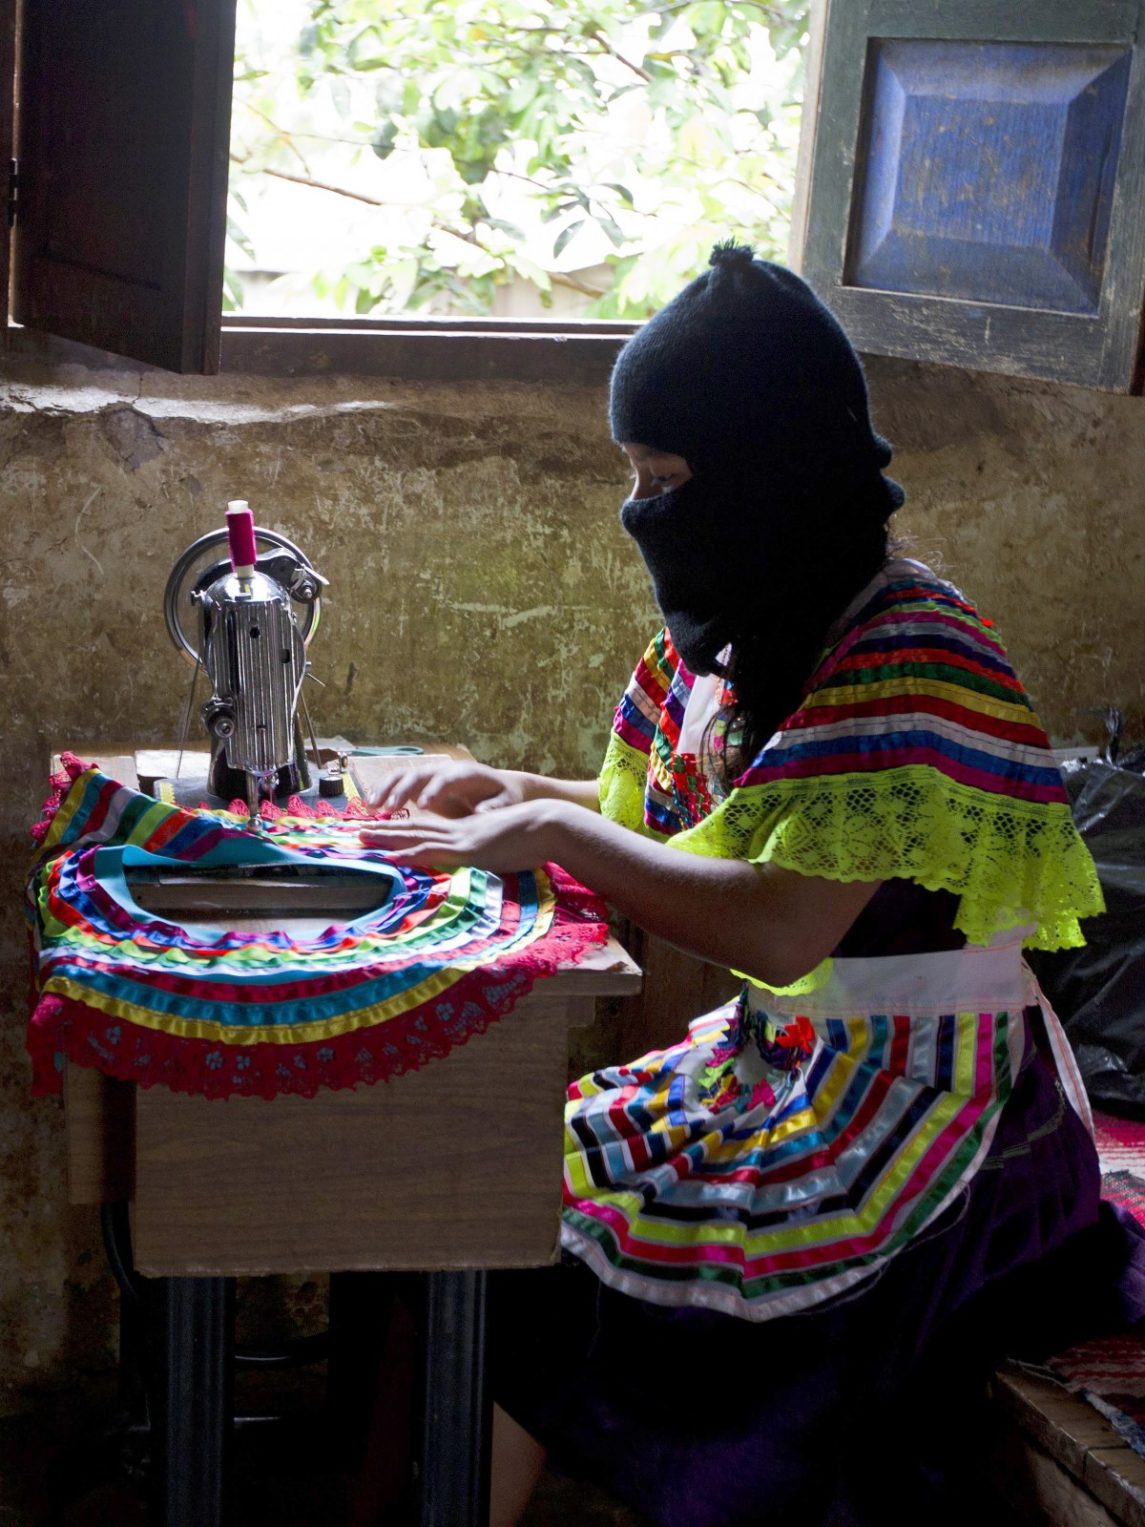 Now You See Me: A Glimpse Into The Zapatista Movement, Two Decades Later